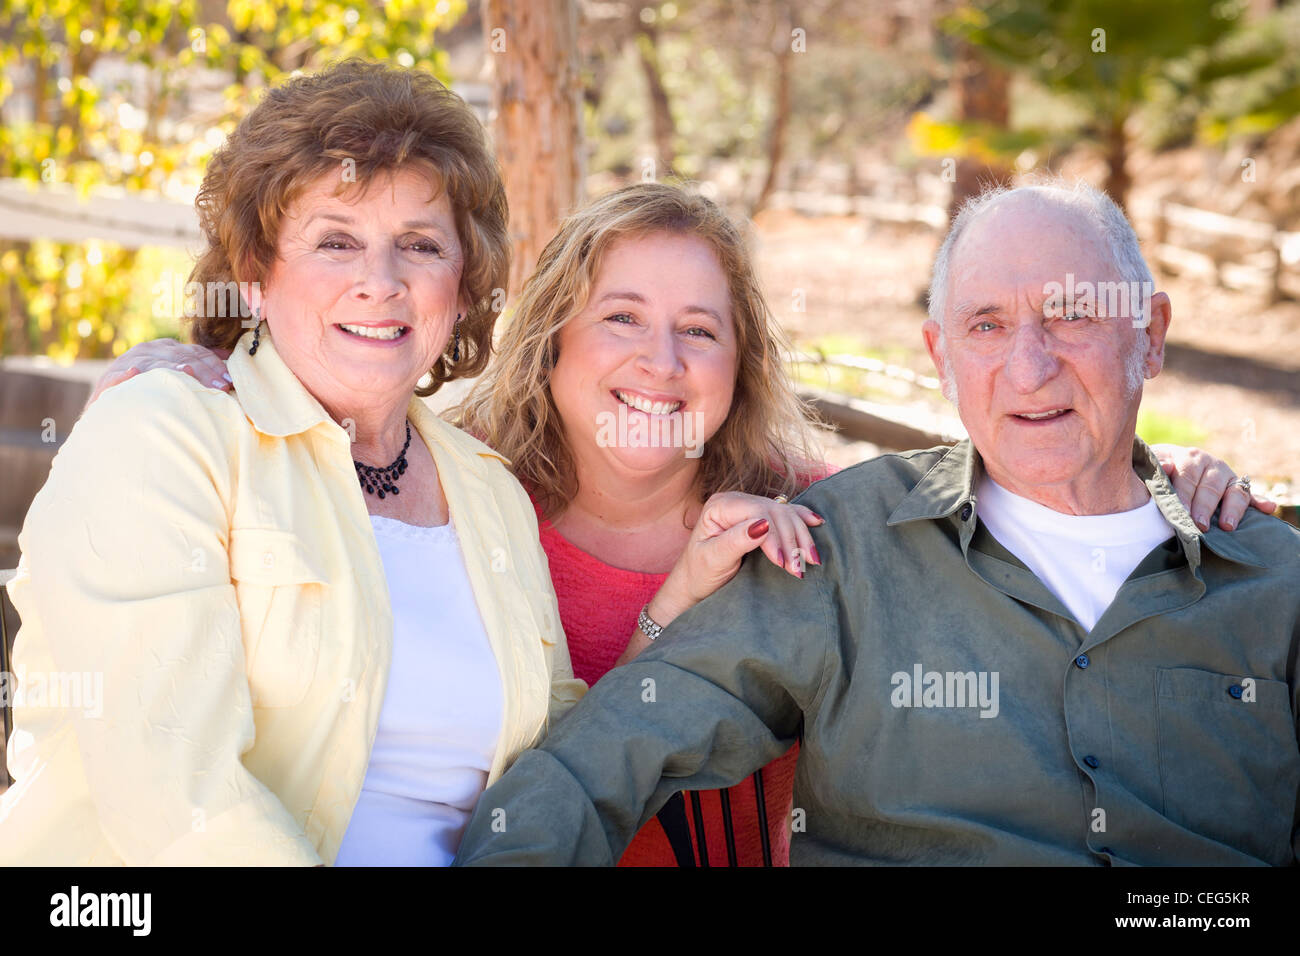 Portrait of Senior Couple with Daughter in the Park. Stock Photo